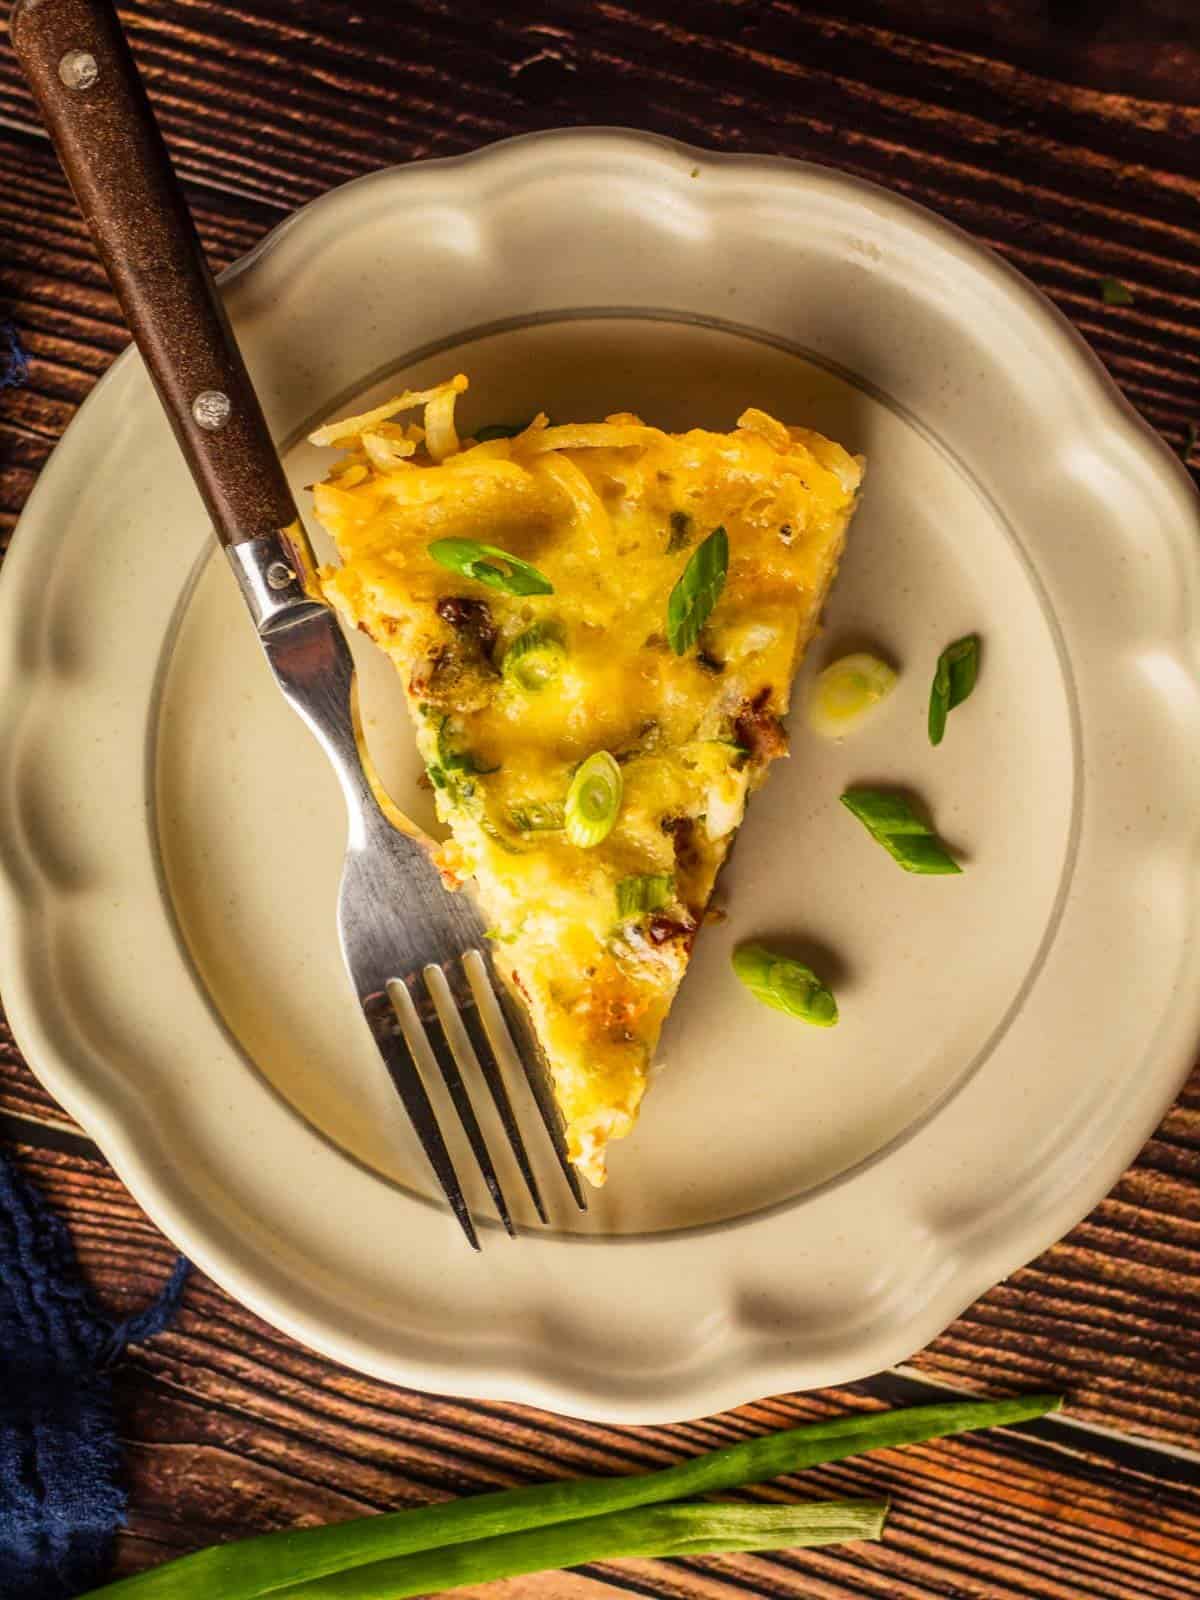 slice of quiche with hash brown crust on plate with fork garnished with sliced green onions